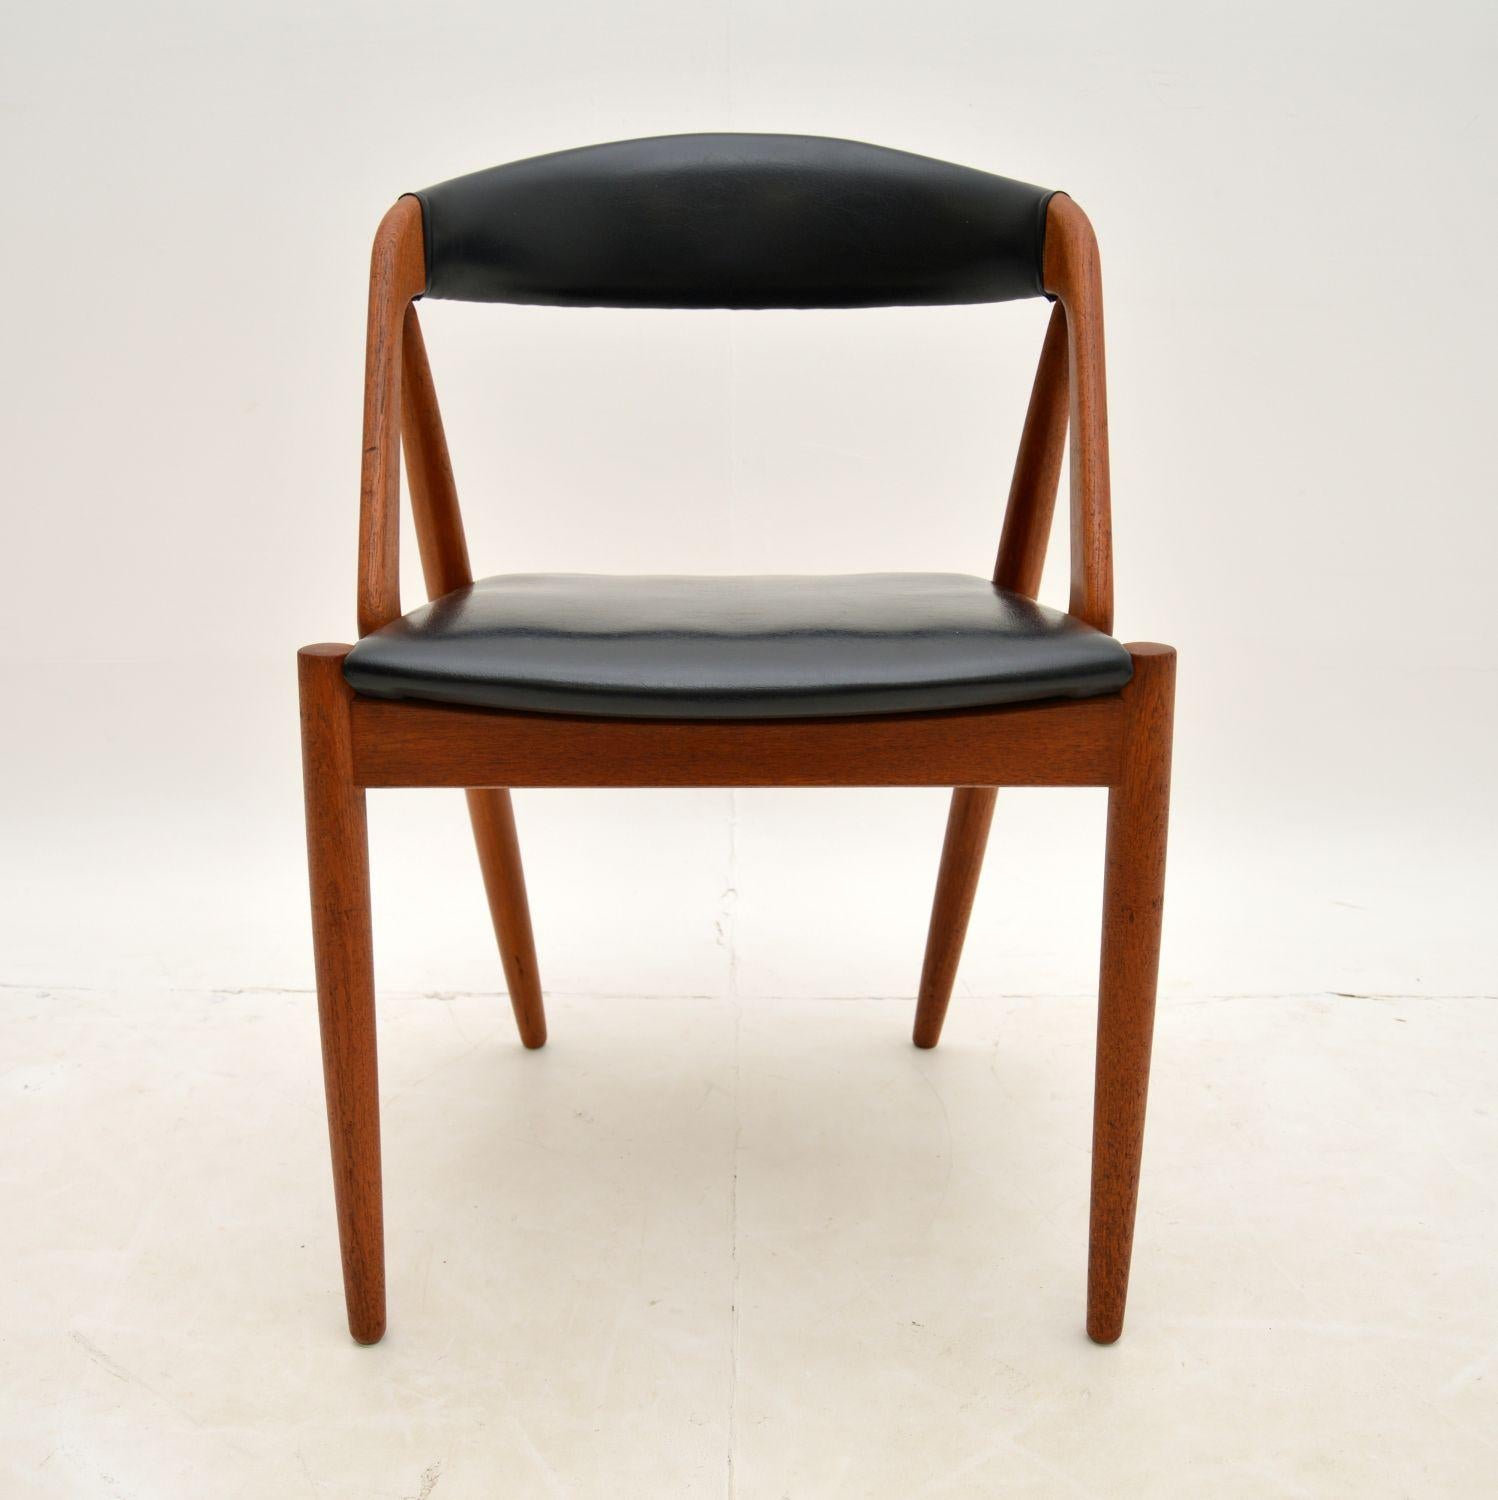 A wonderful and iconic Danish chair in solid teak. This model 31 chair was designed by Kai Kristiansen and it dates from the 1960’s.

It is of superb quality and has a stunning design. The solid teak frame is upholstered in black vinyl, it has a